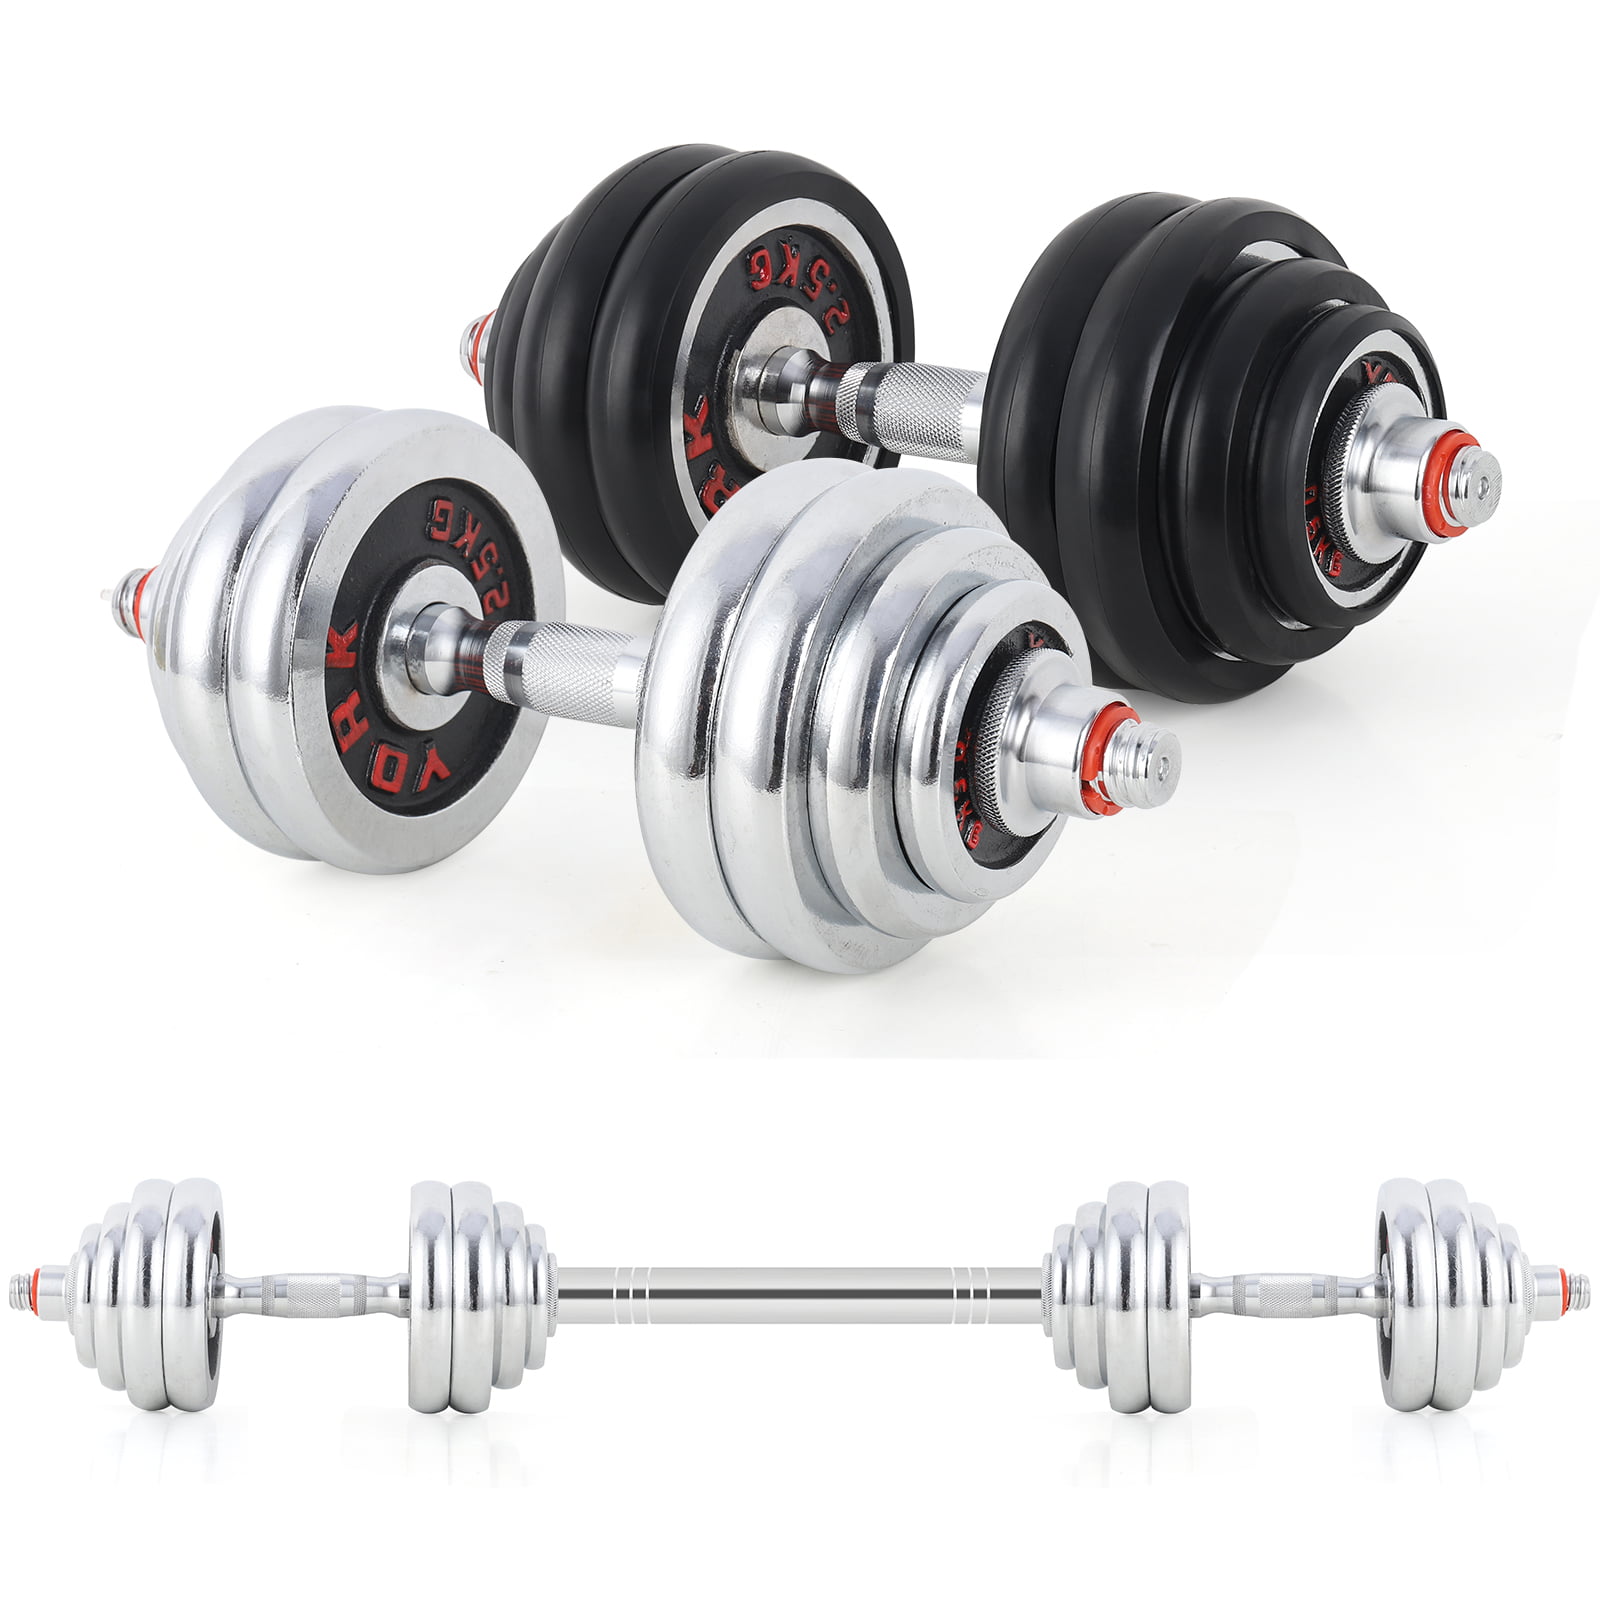 XINYI Adjustable Dumbbell Set Barbell 3 In 1 Strength Training Equipment Home Gym Free Weights Lifting,Bench Press Dumbells Pair For Women And Man 